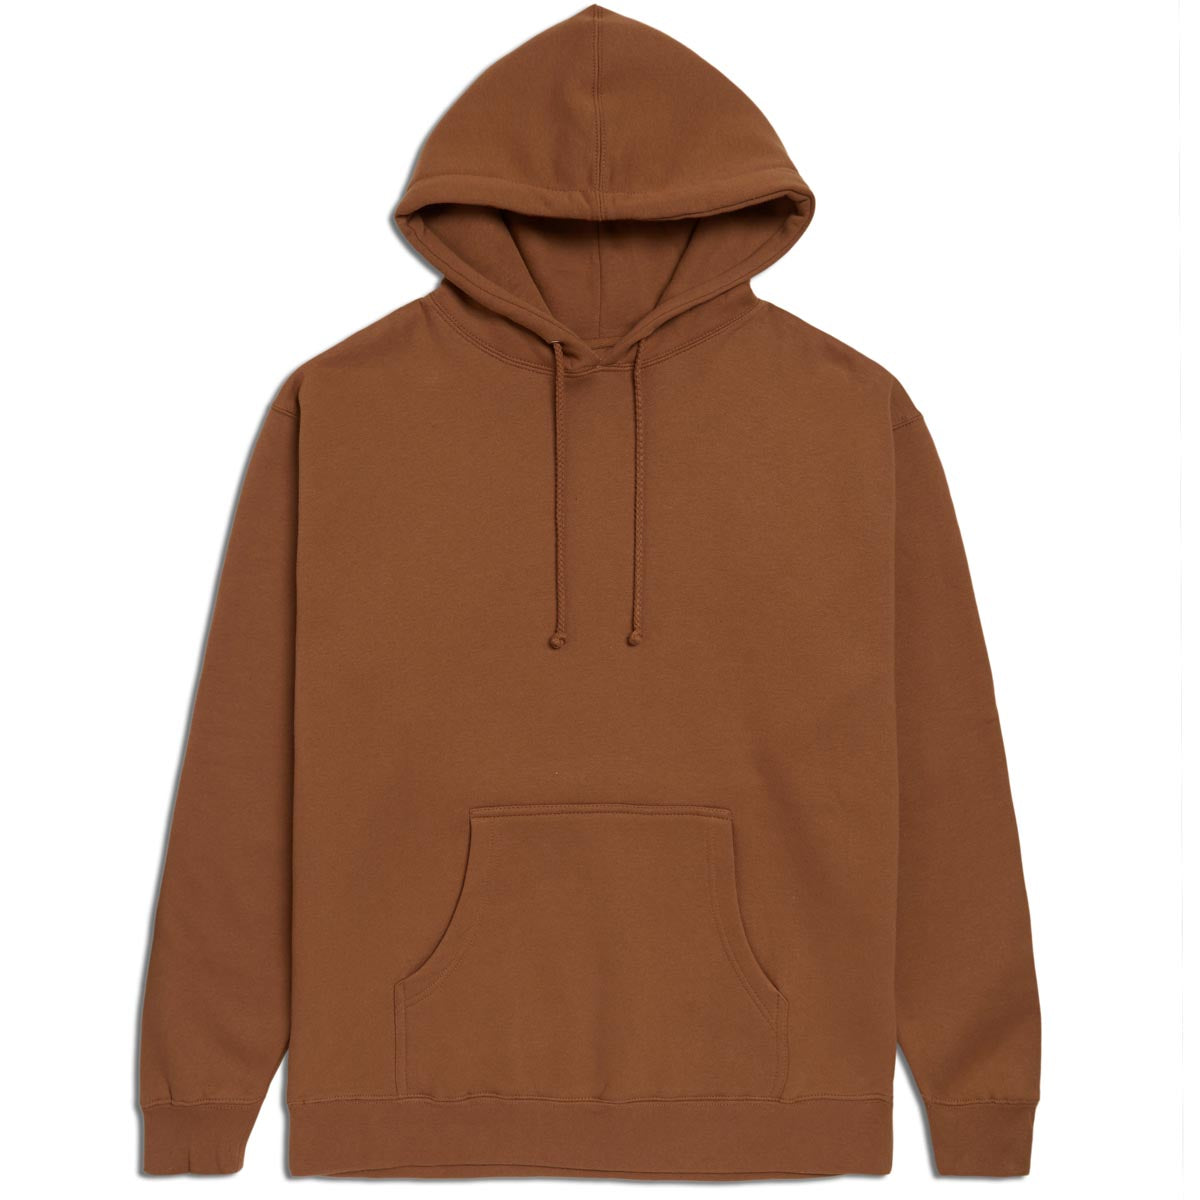 CCS Staple Pullover Hoodie - Camel image 1